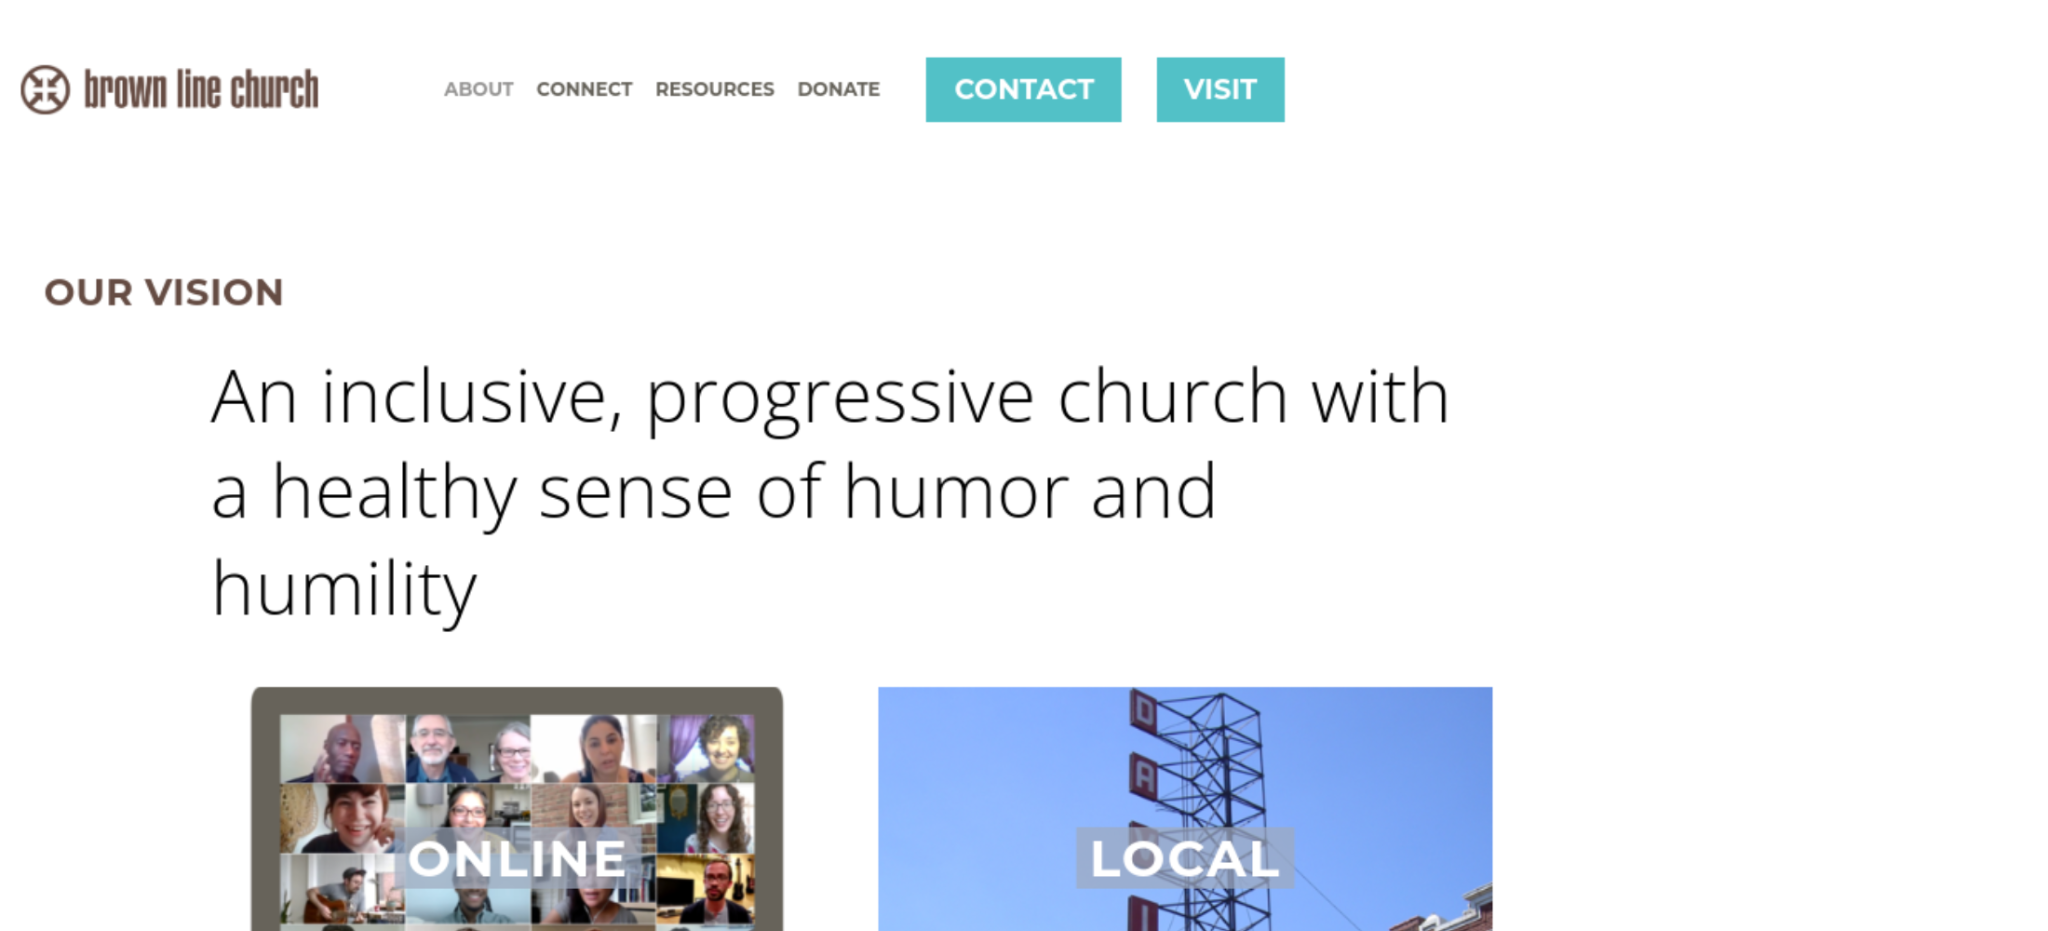 Screenshot of Brown Line Church's website showing their vision statement. 